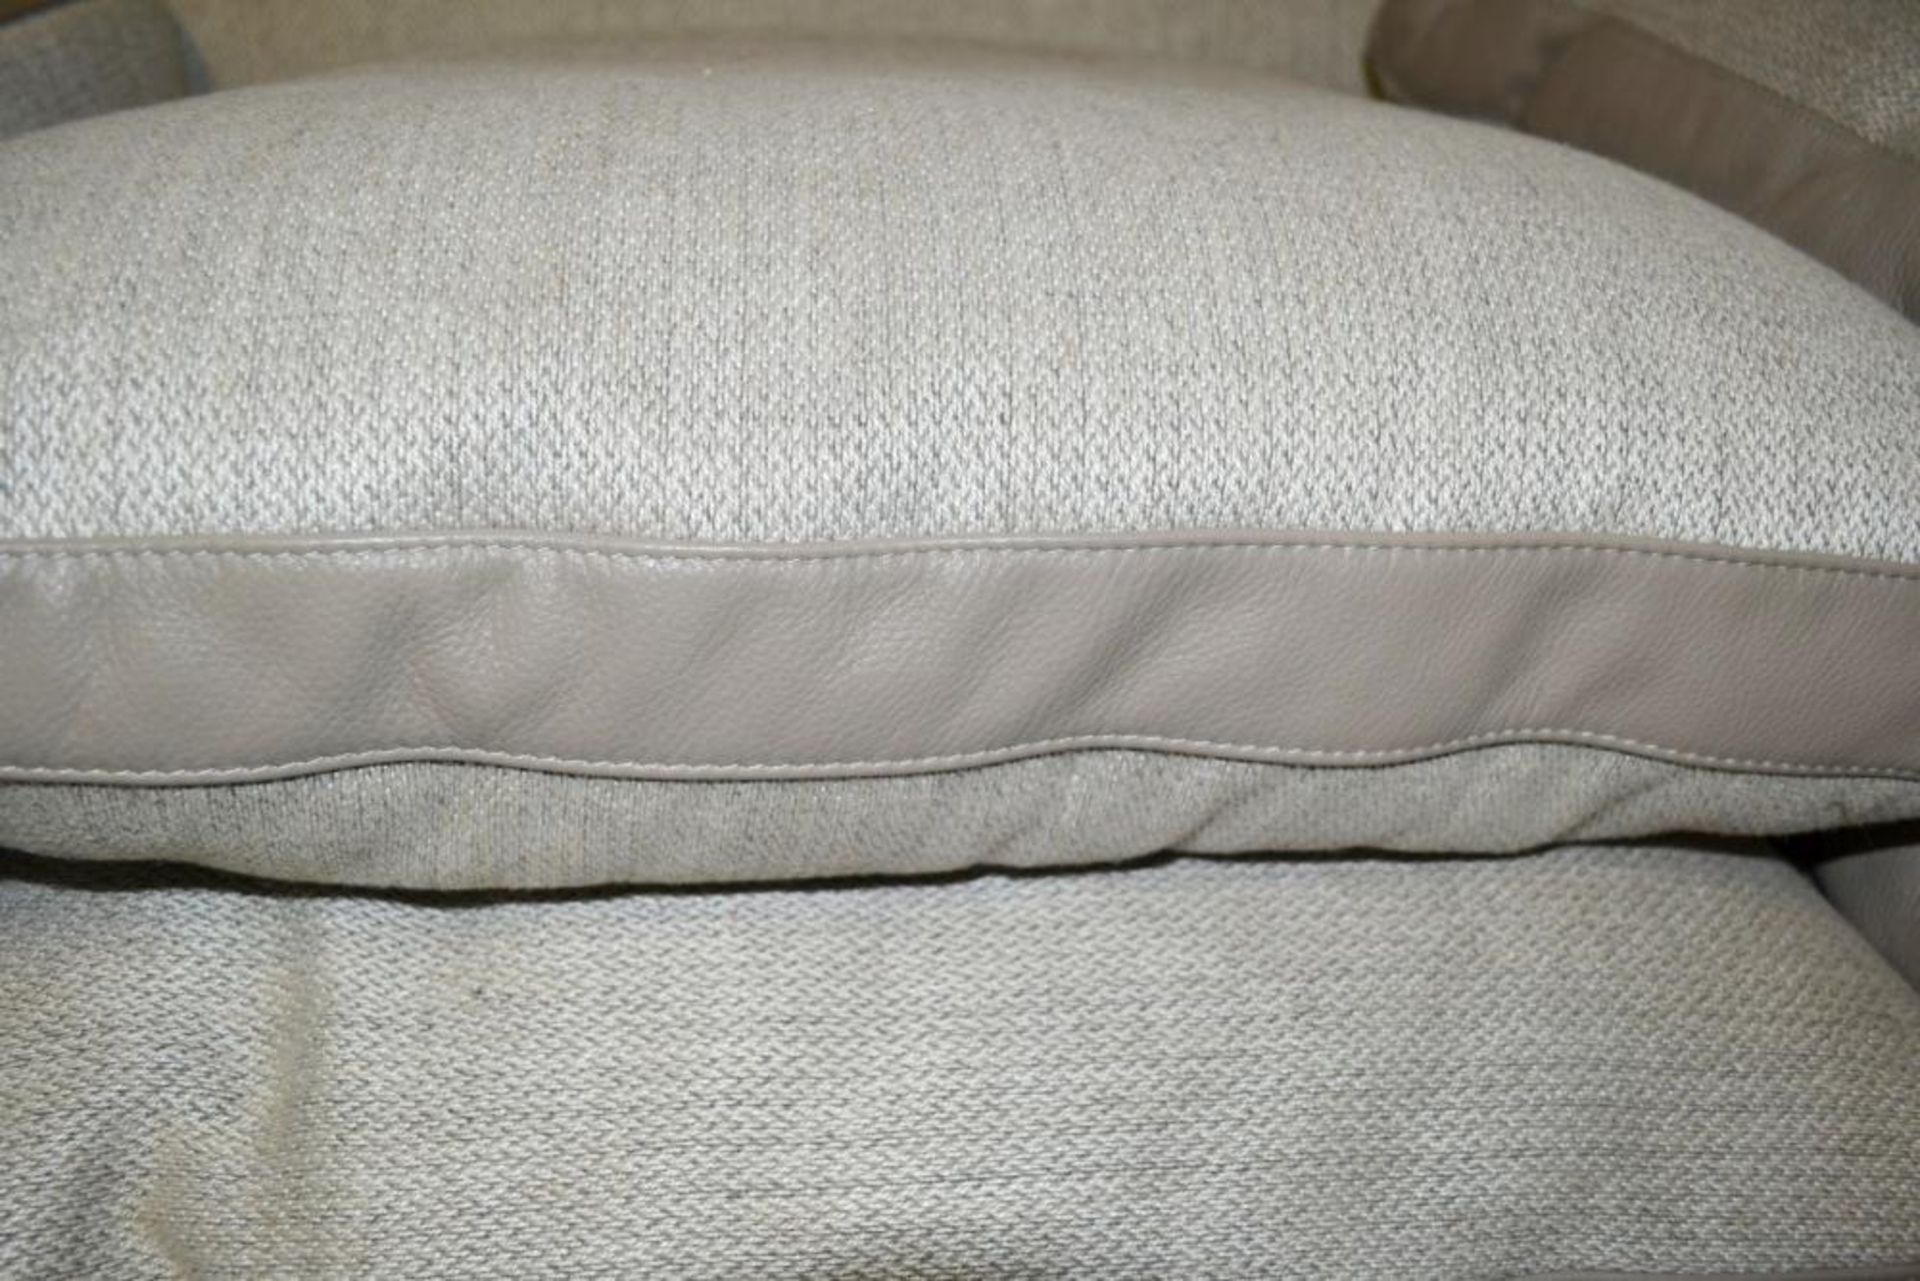 1 x POLTRONA FRAU "Mass Angolo" Large Left-Hand Sofa Element - Richly Upholstered In A Mix Of Fabric - Image 8 of 11